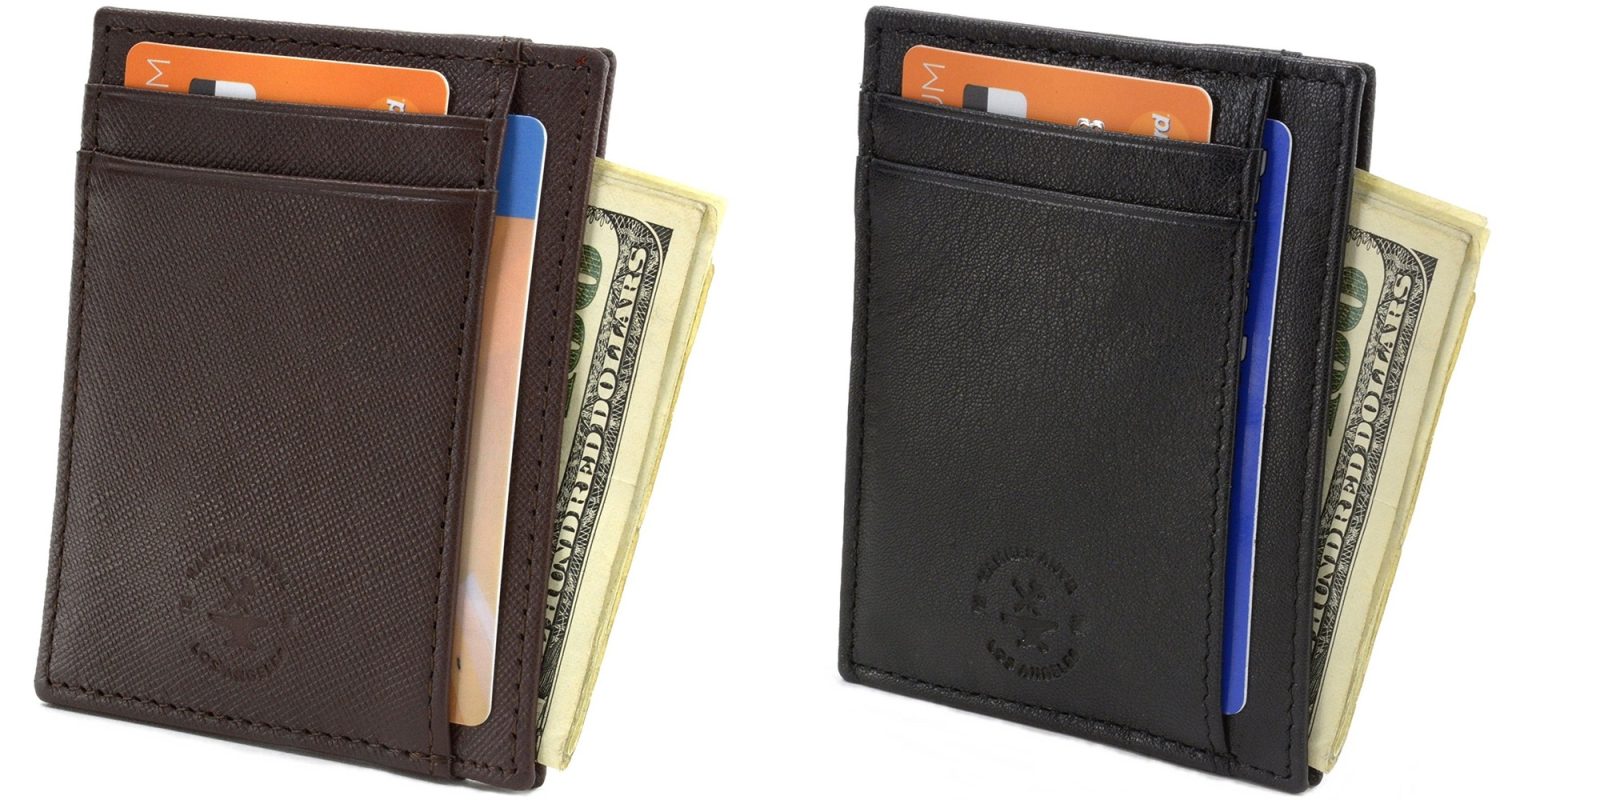 These Minimalist Genuine Leather Front Pocket Wallets are as low as $6 Prime shipped today ...